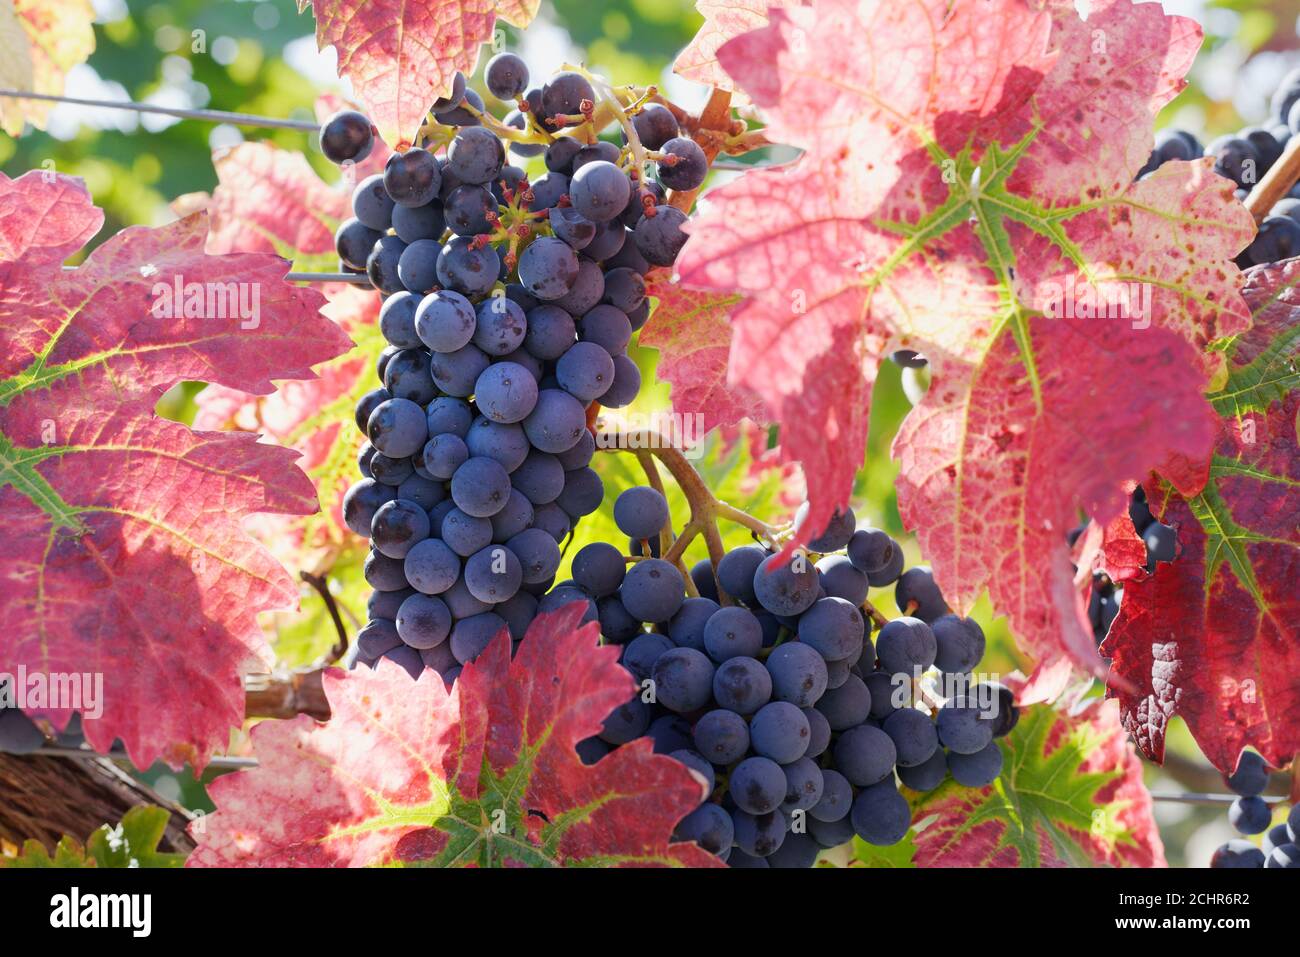 Grapes in the sunlight, just before harvest. Stock Photo